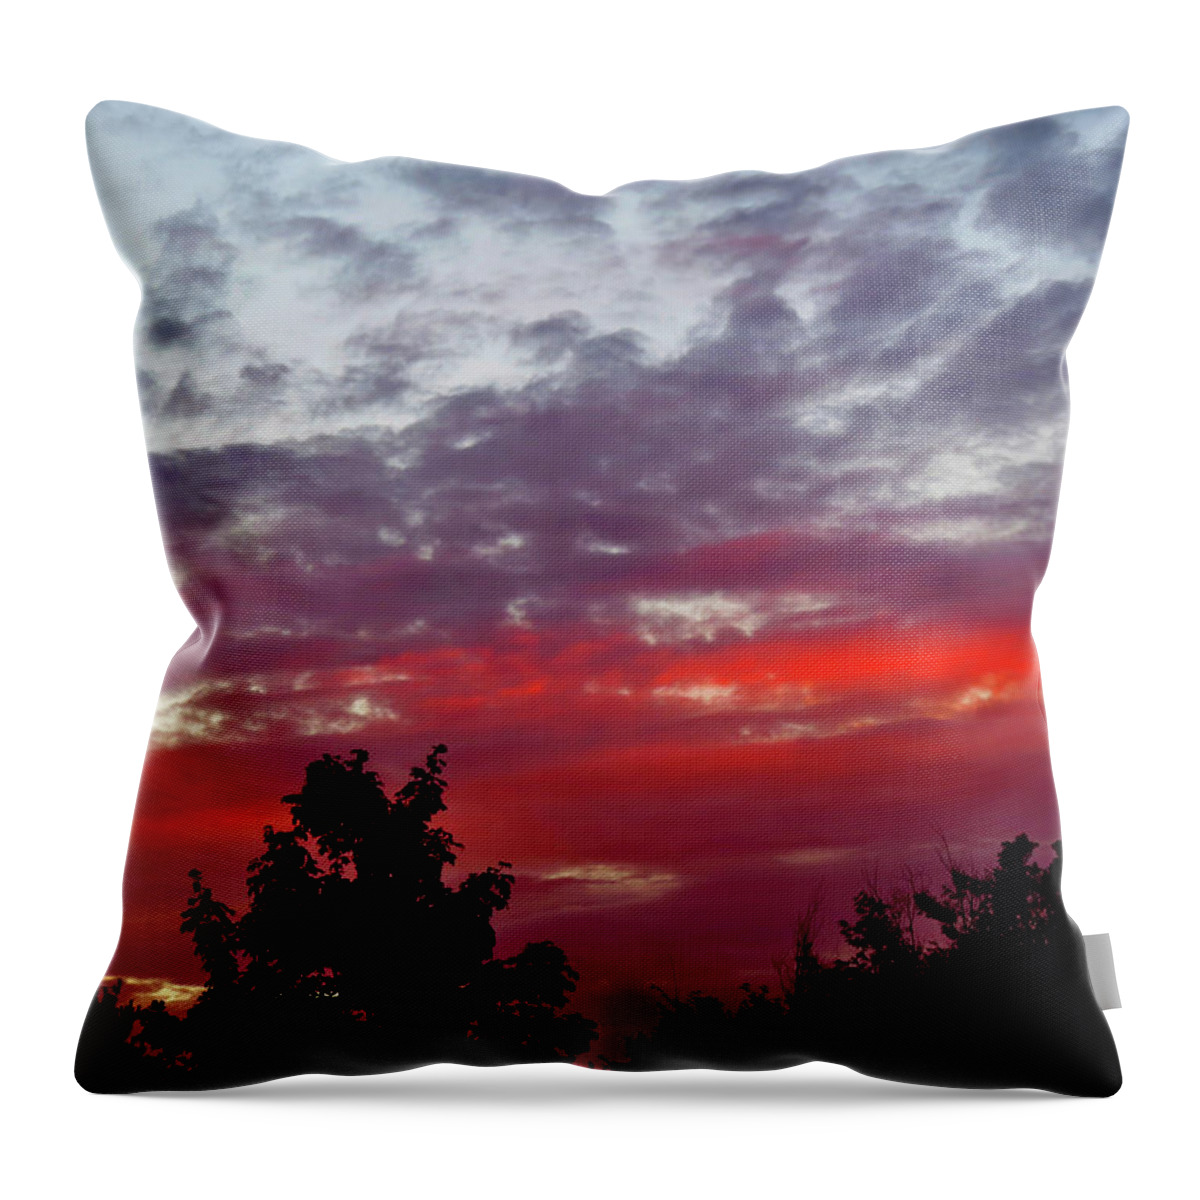 Night Sky Throw Pillow featuring the photograph Busy Autumn Evening by Linda Stern